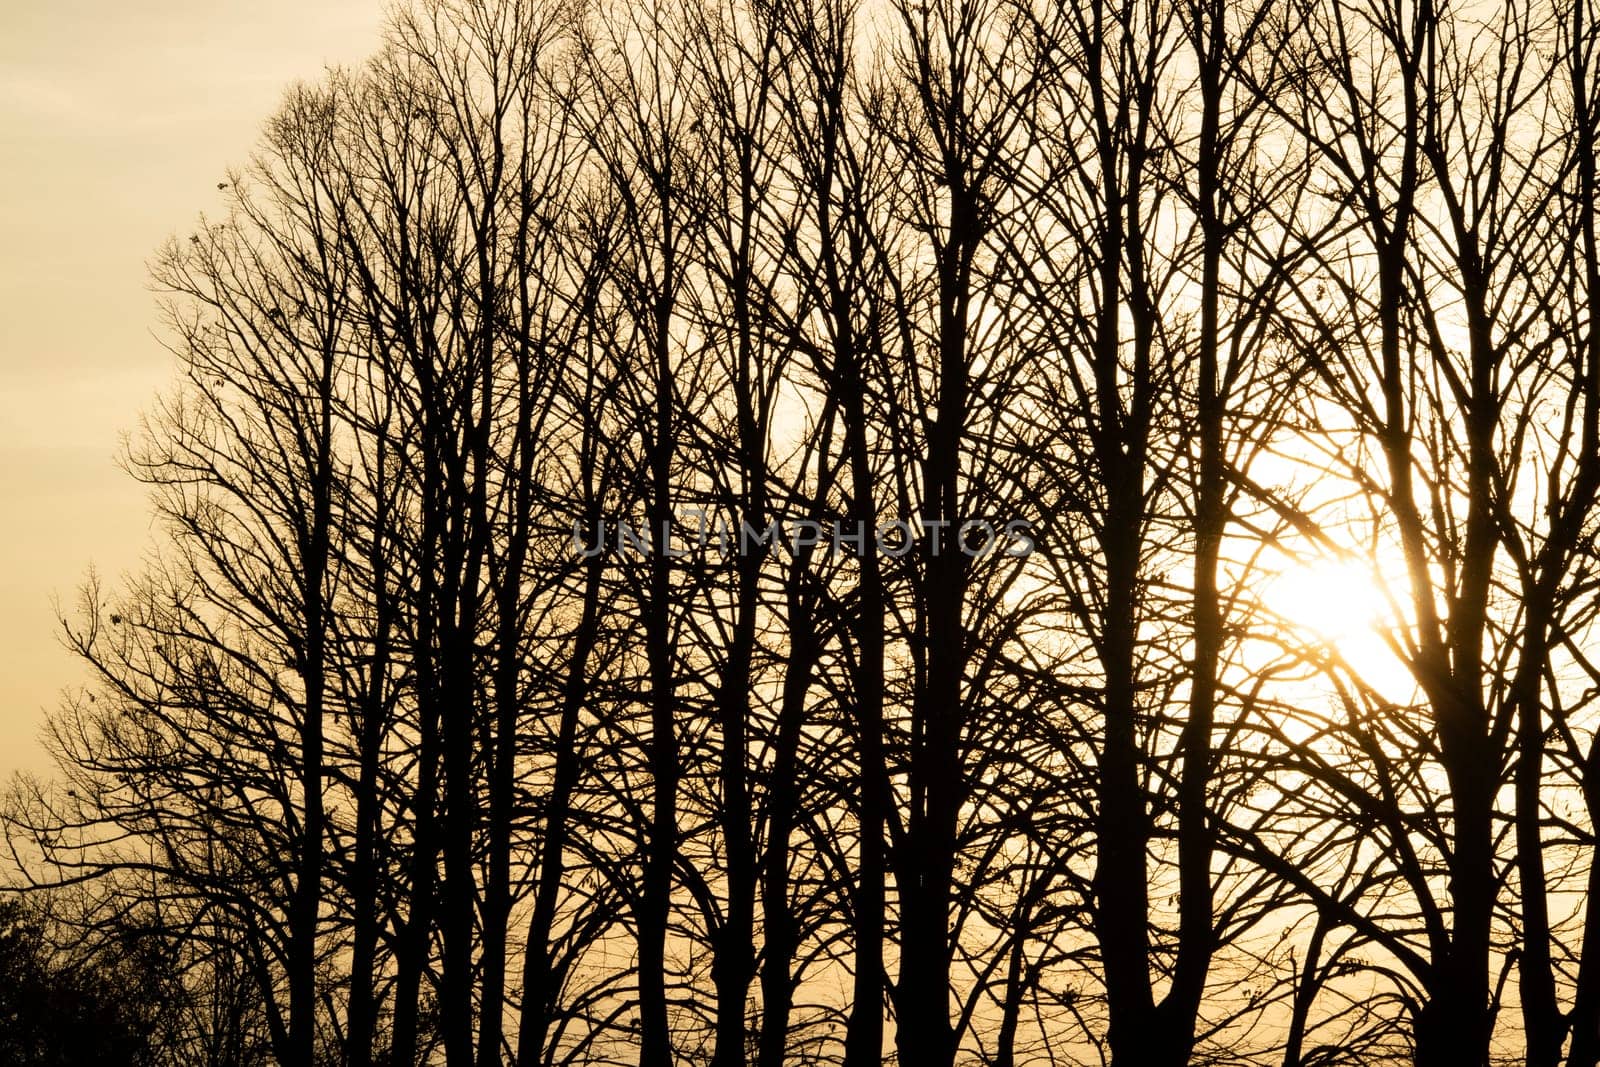 Photographic documentation of the sunset among the trees  by fotografiche.eu